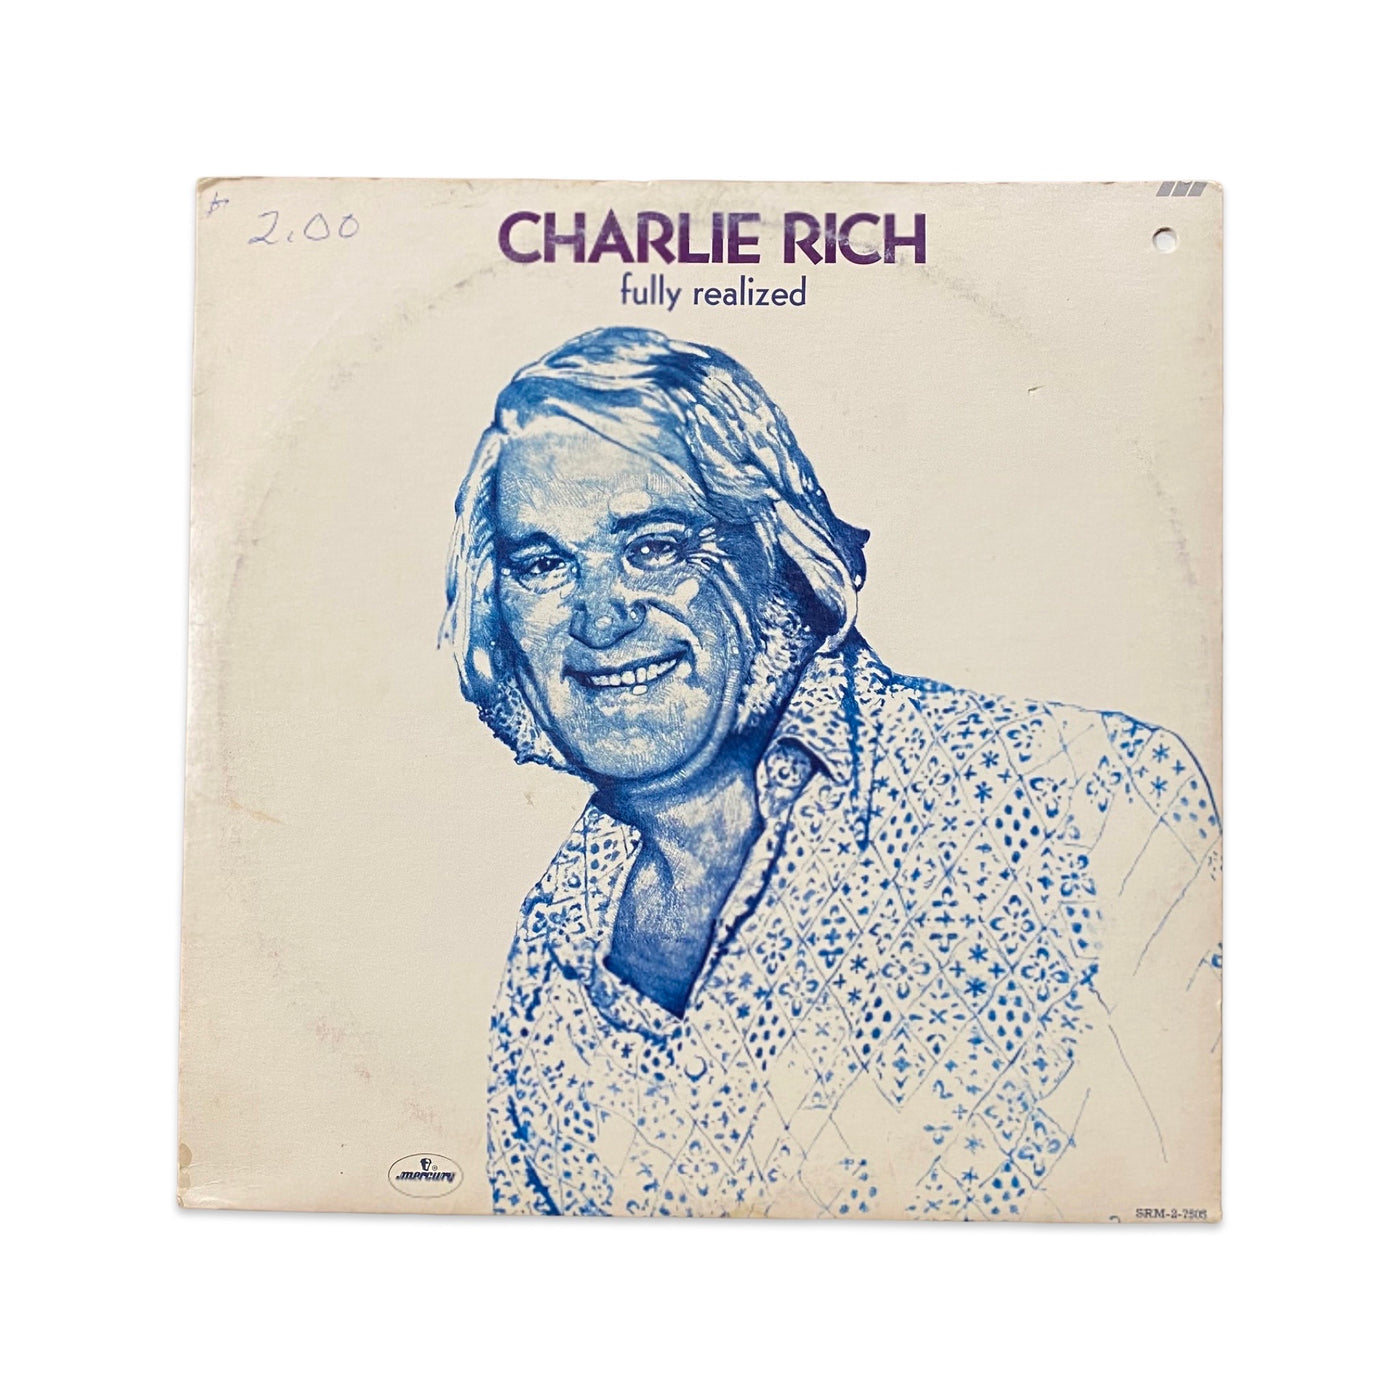 Charlie Rich - Fully Realized